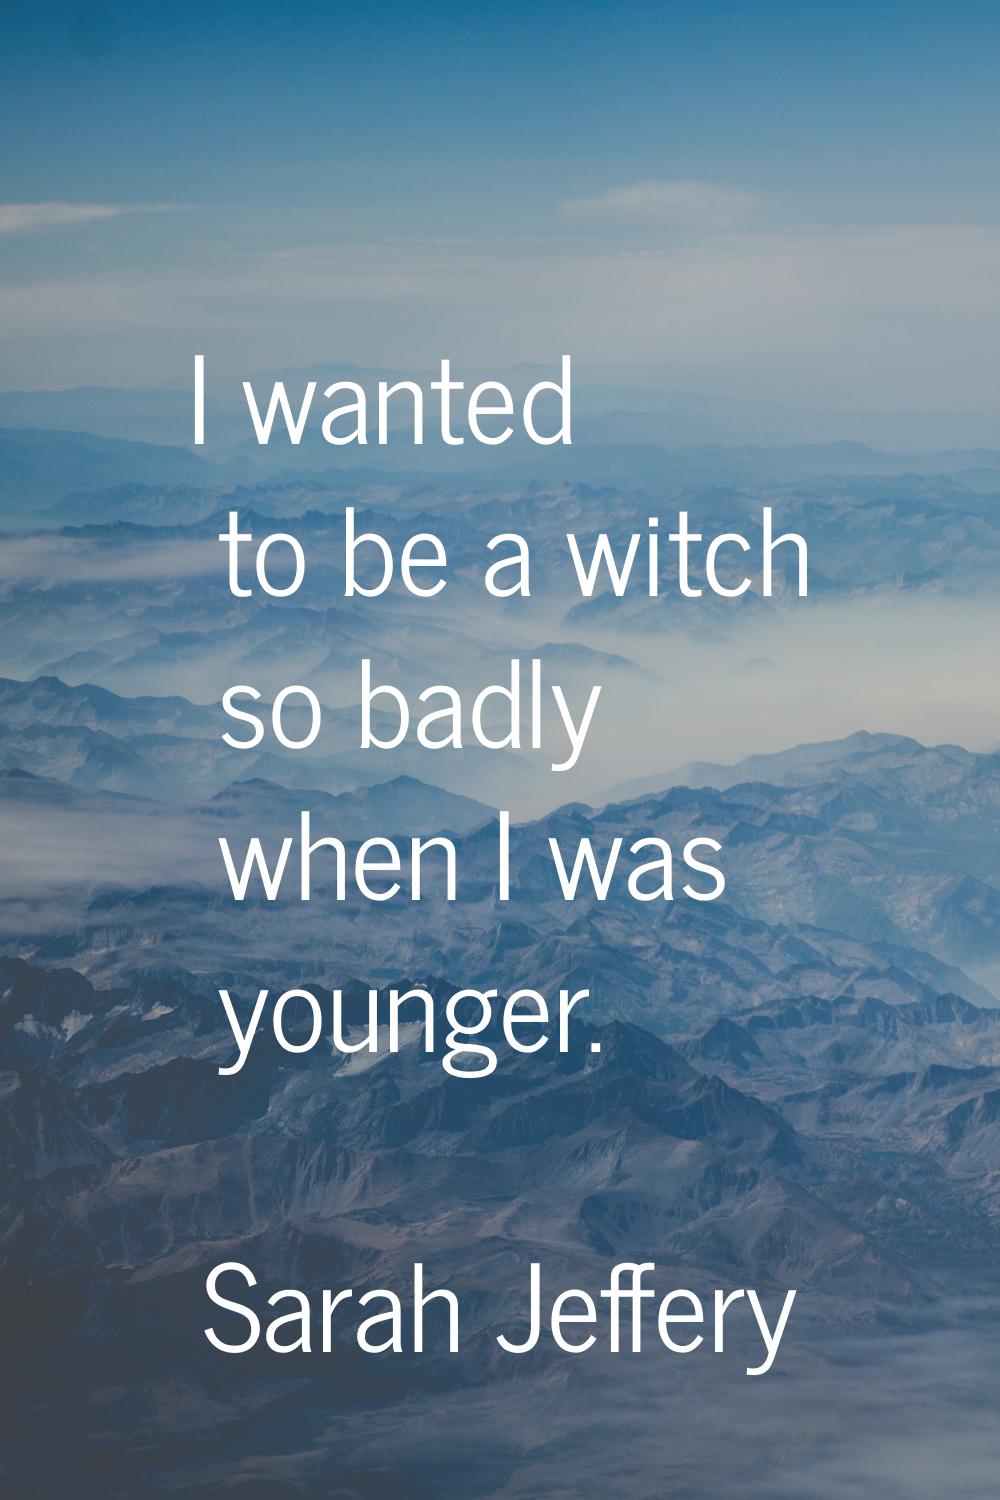 I wanted to be a witch so badly when I was younger.